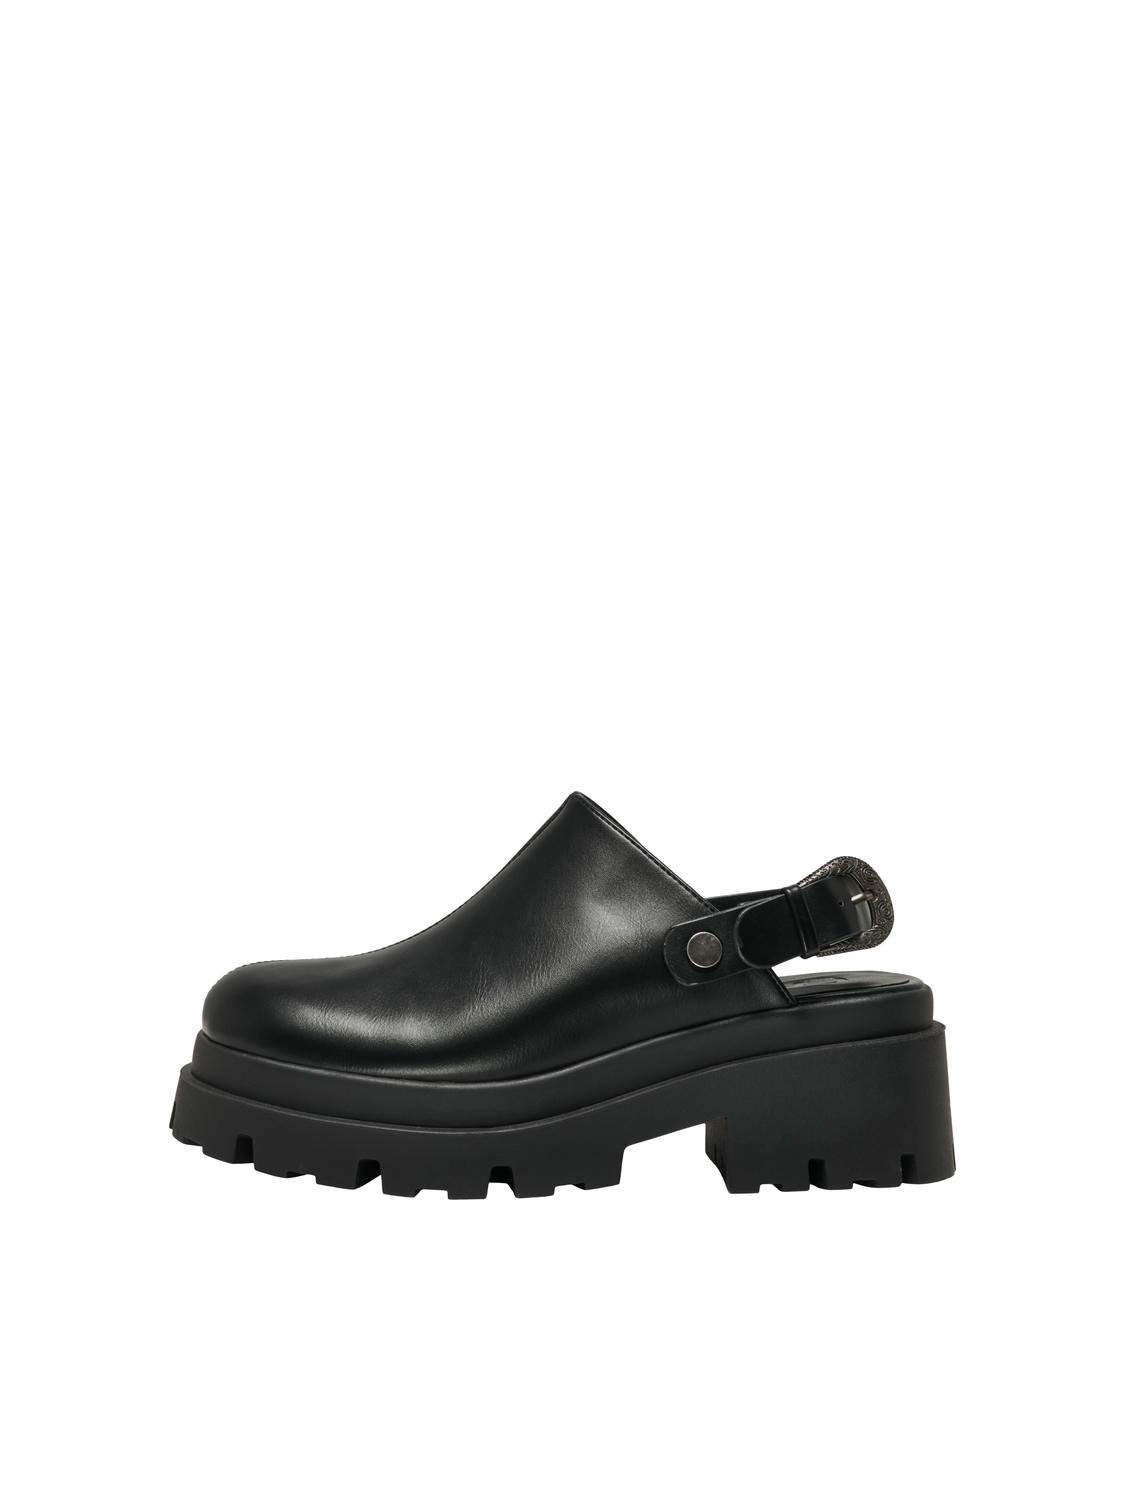 ONLY Round toe Other Shoes -Black - 15320042